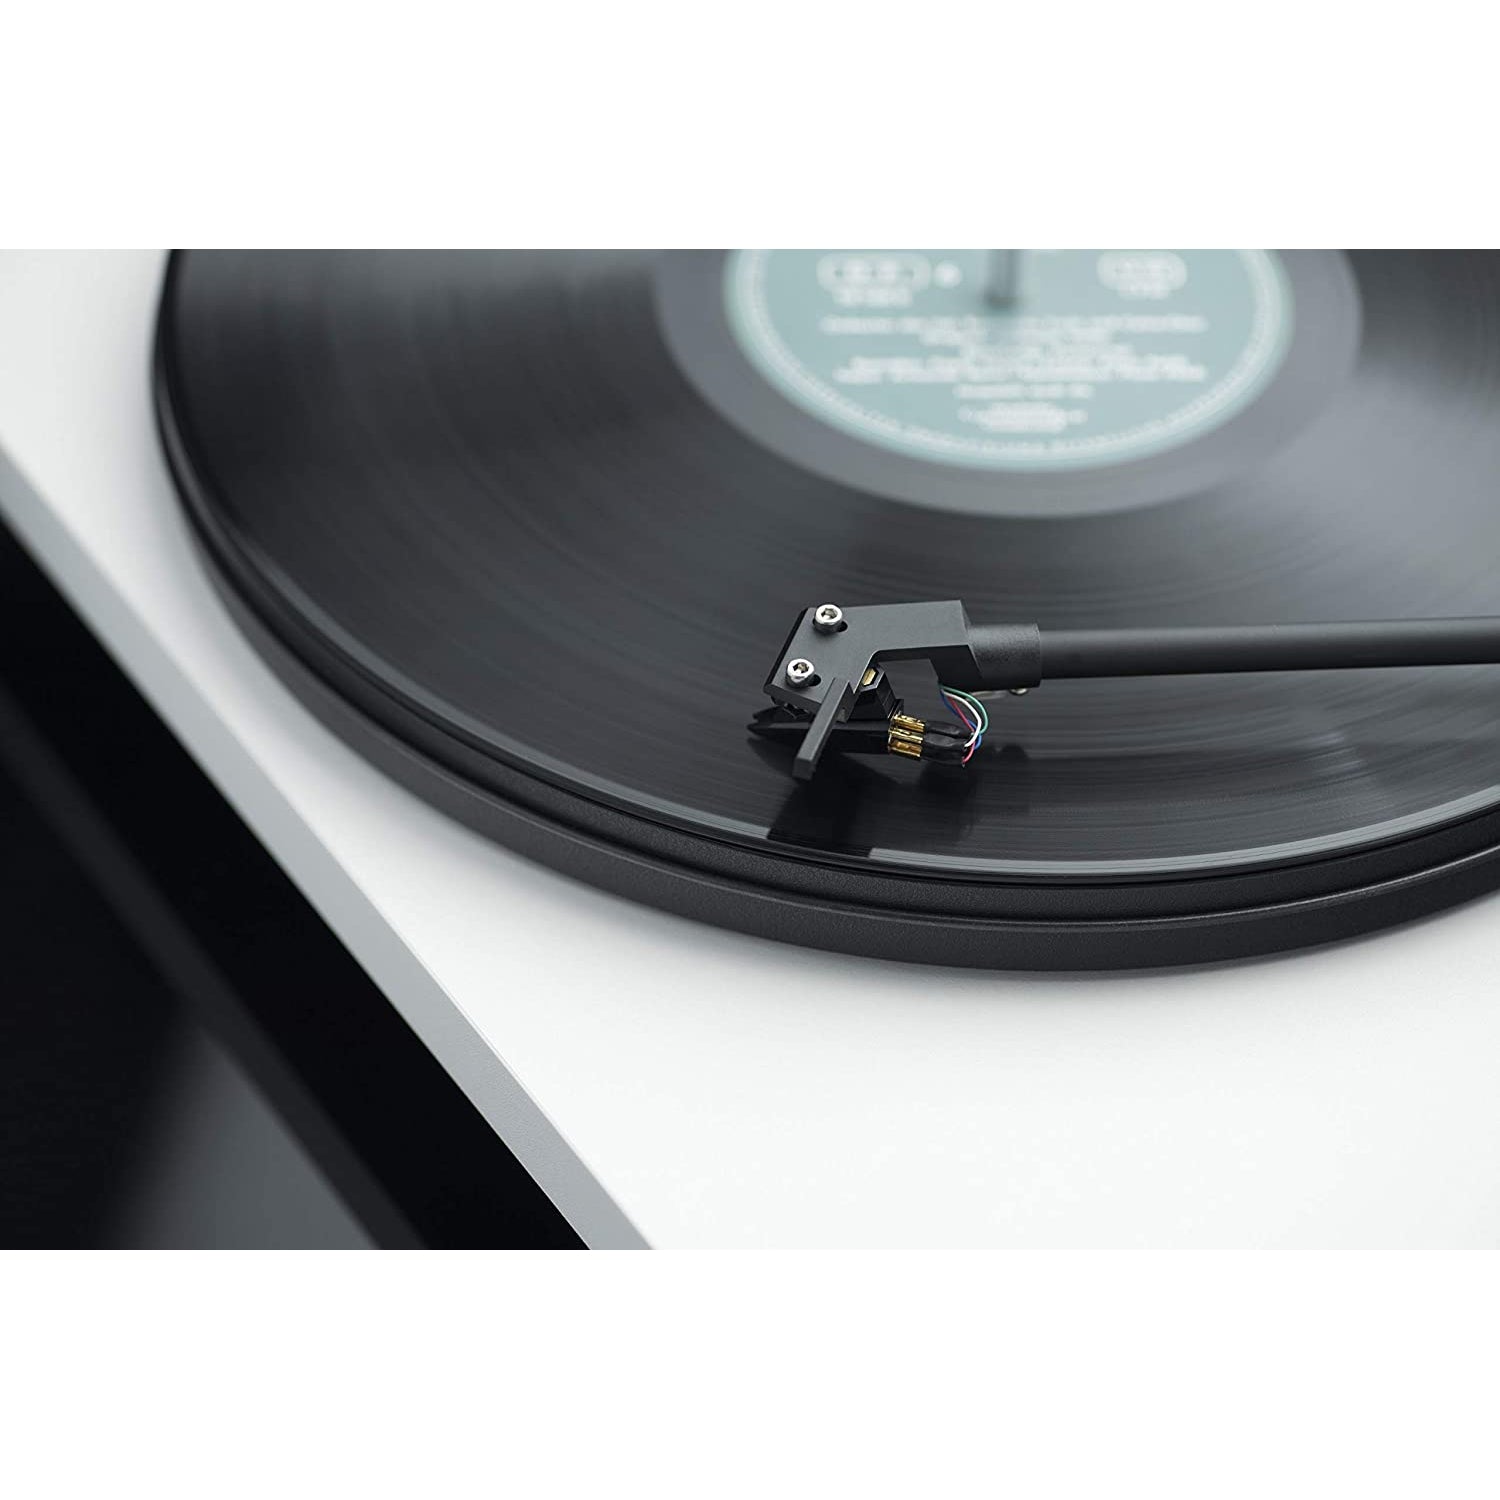 Pro-Ject Audio Systems Primary E Turntable, Black